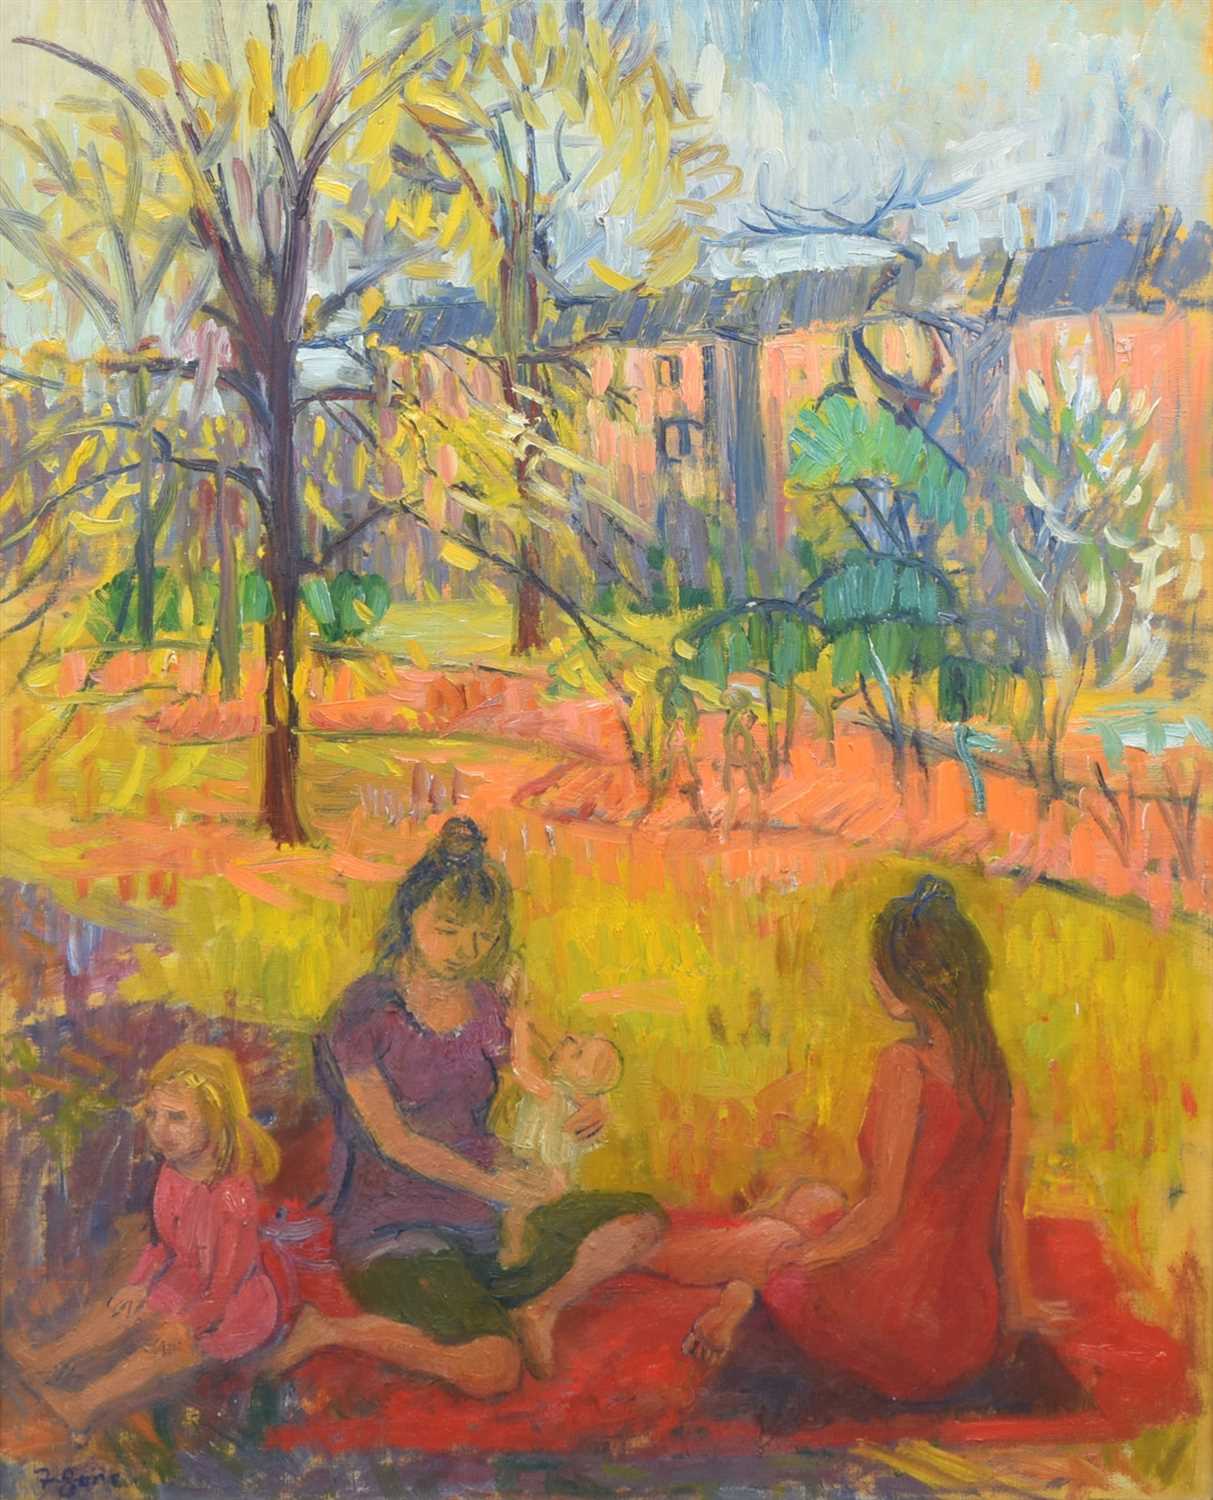 Lot 376 - Frederick Gore (British, 1913-2009), "The Picnic", signed, oil on canvas.